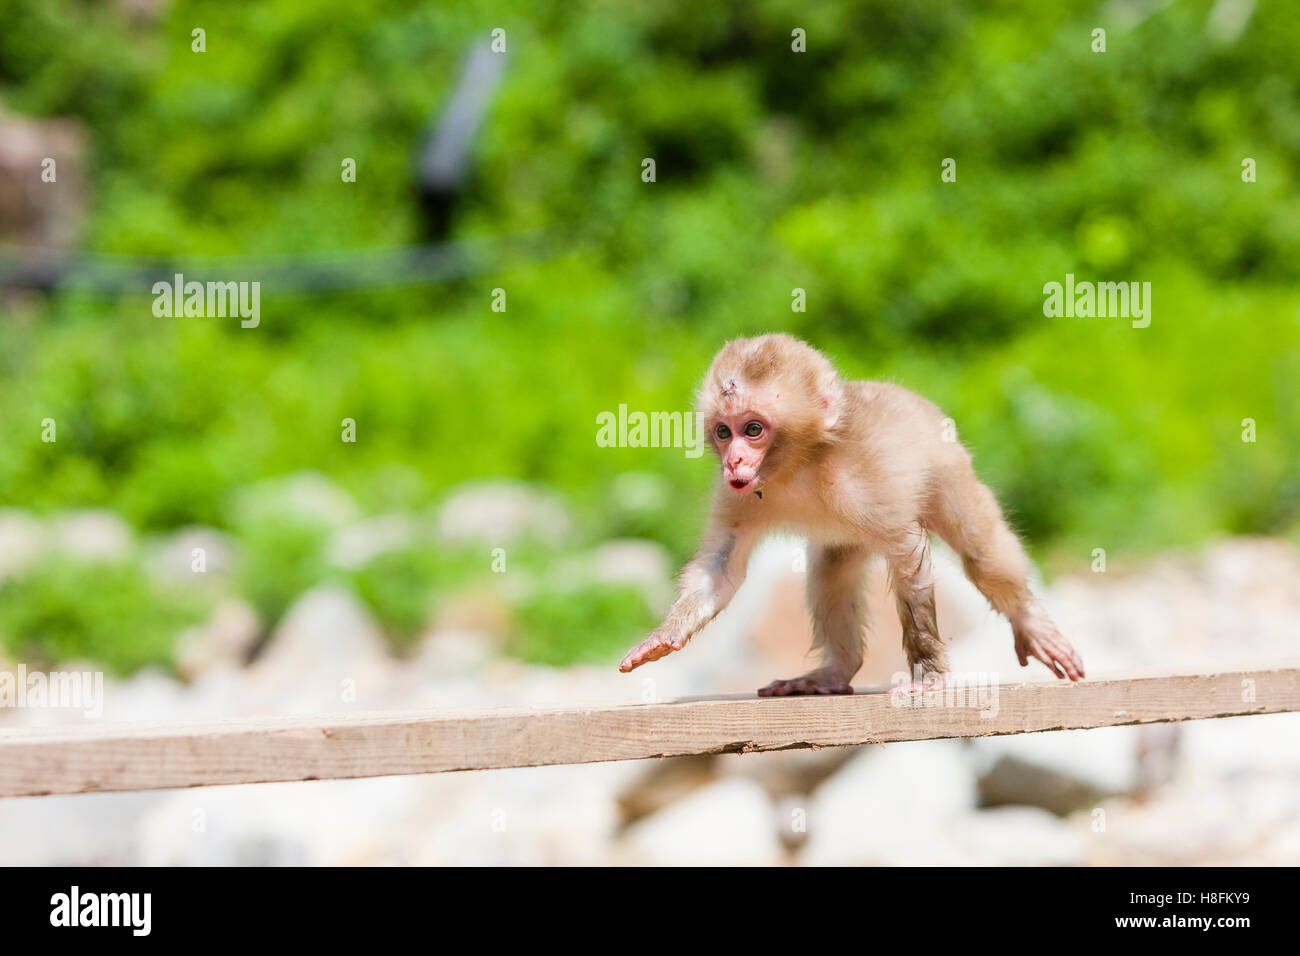 Jigokudani Monkey Park, Yudanaka, Japan. A very young Japanese macaque (Macaca fuscata) scampers across a piece of wood Stock Photo